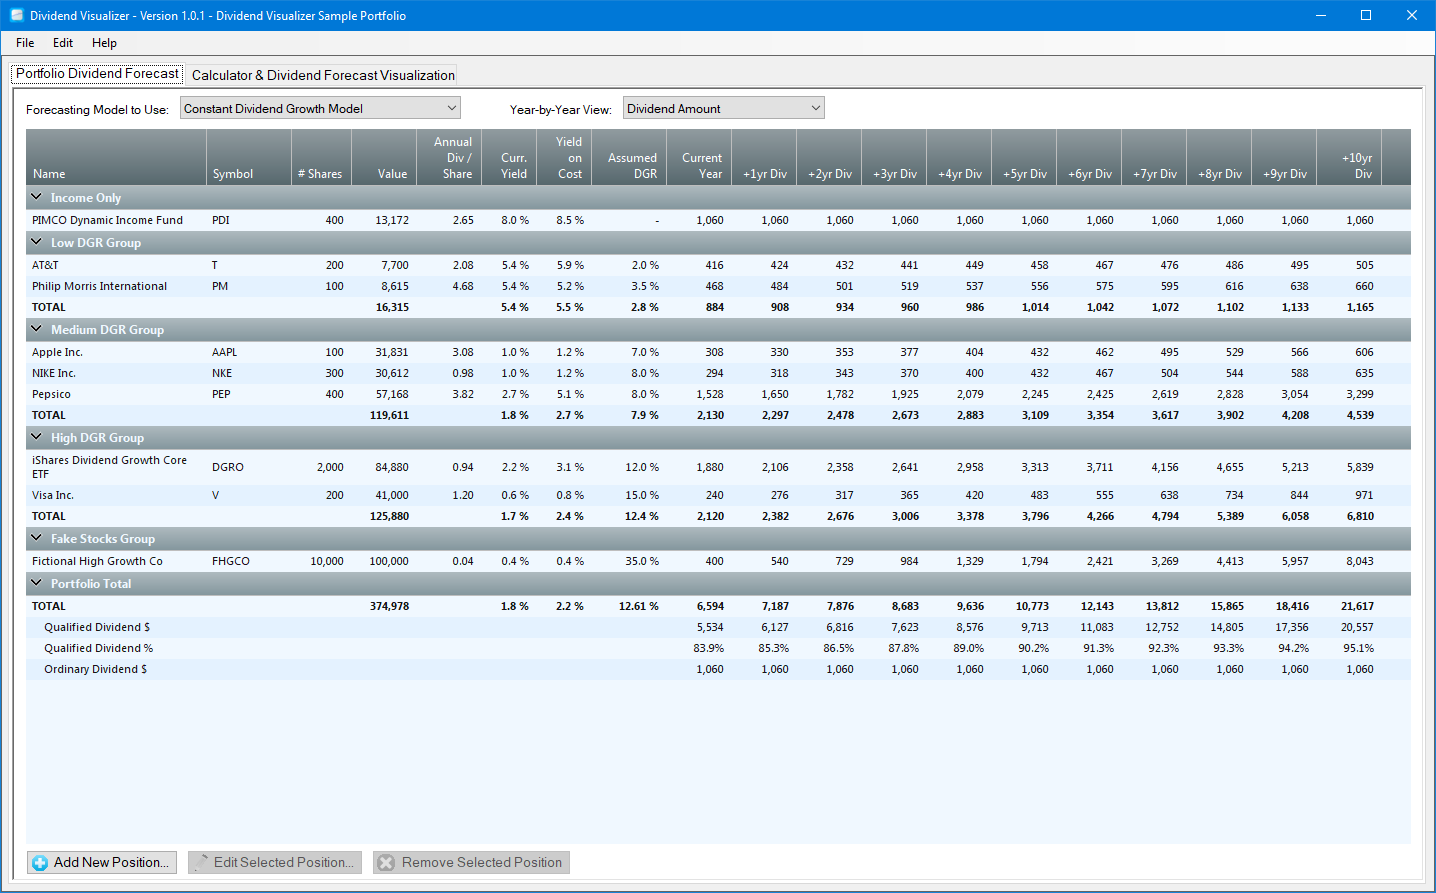 This shows stocks in your portfolio, showing the forecasted dividend growth for each position over 10 years